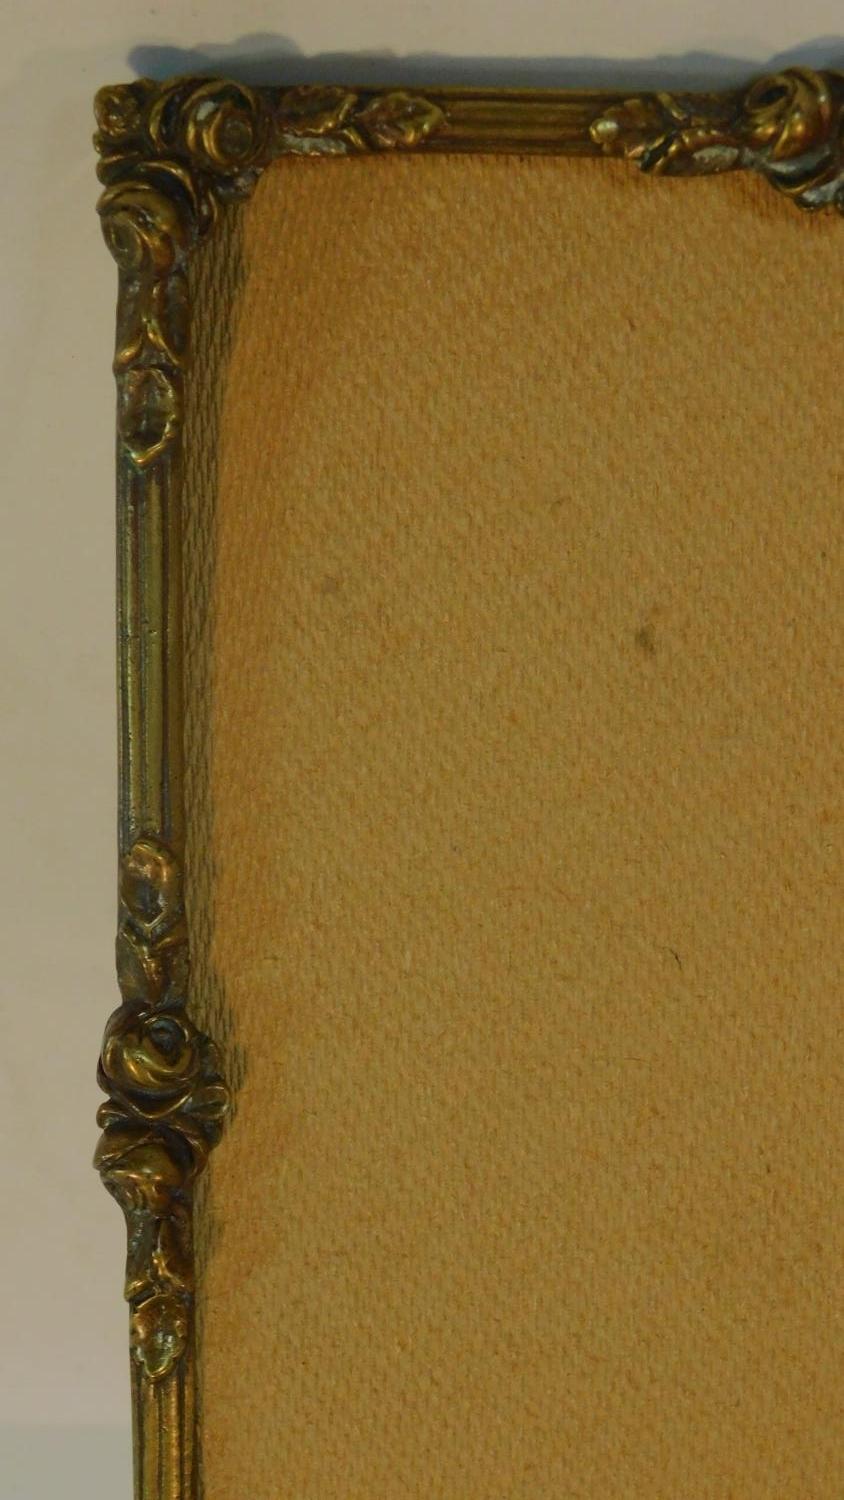 An antique brass relief moulded easel photo frame with roses and foliage and Y shaped brass hinged - Image 2 of 3